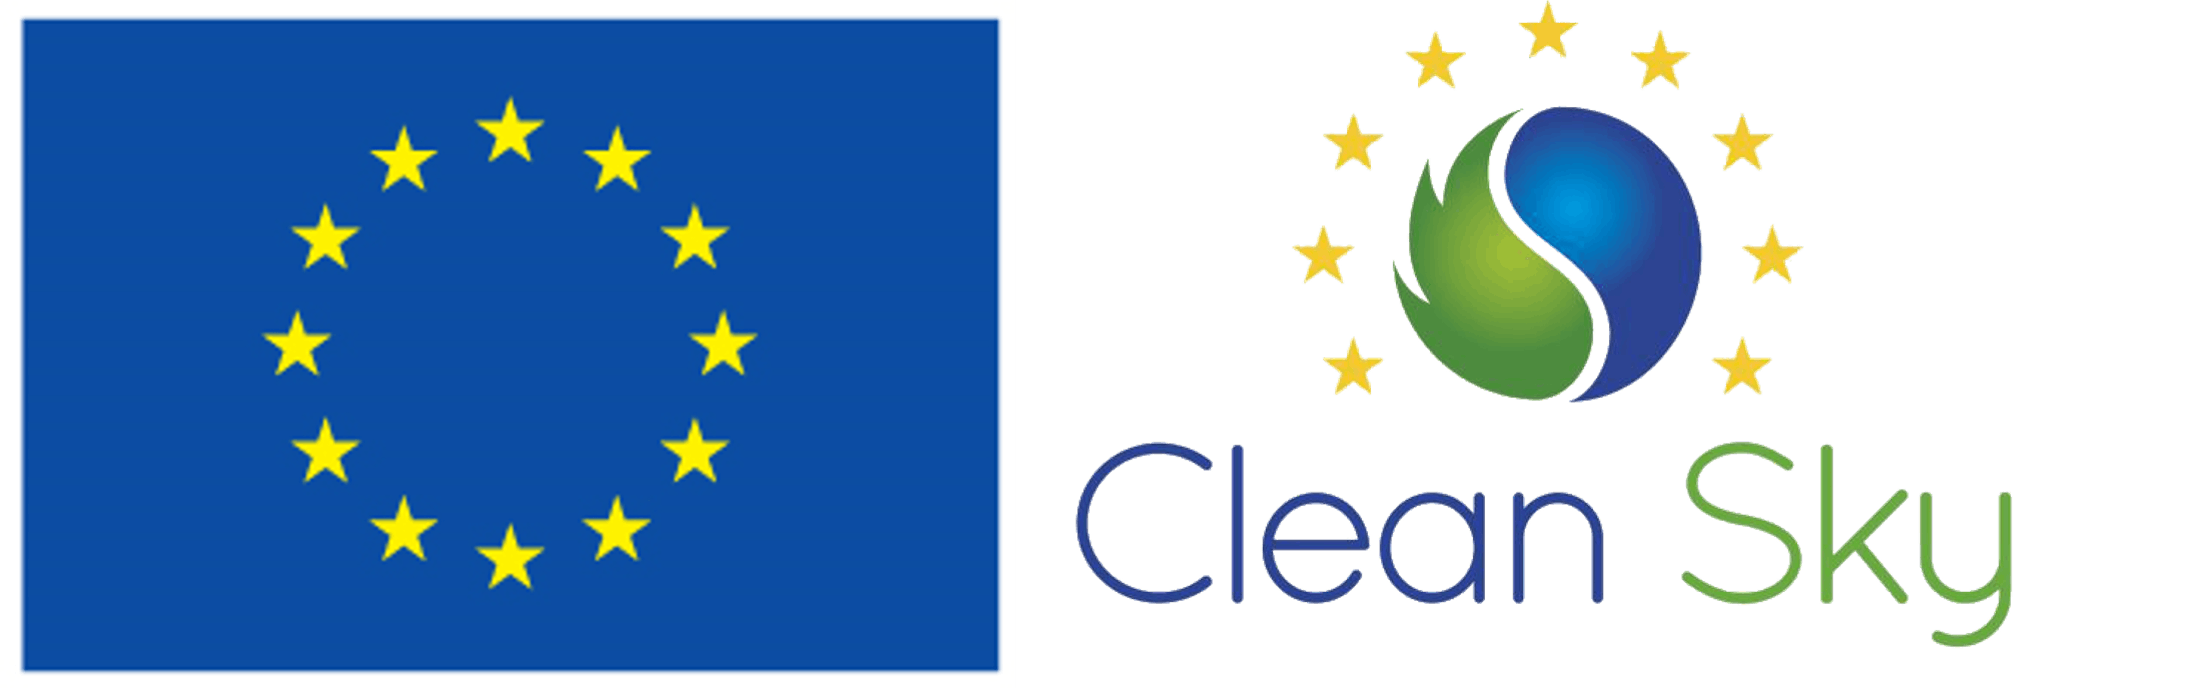 Europe flag and Clean Sky logo